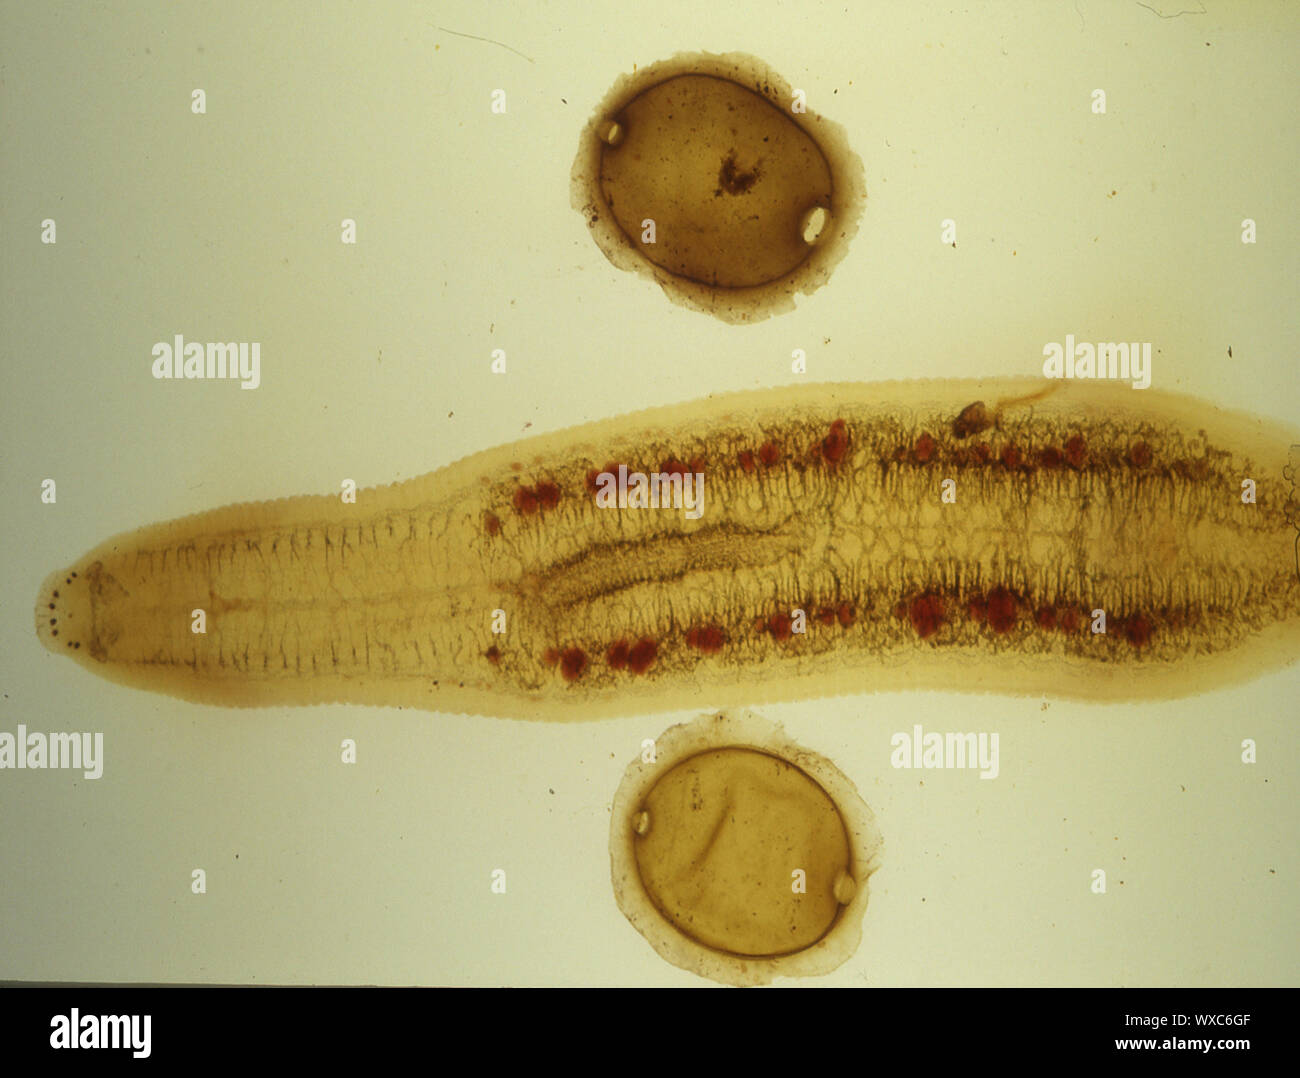 Parasitic flukes in the pool under the microscope 100x Stock Photo